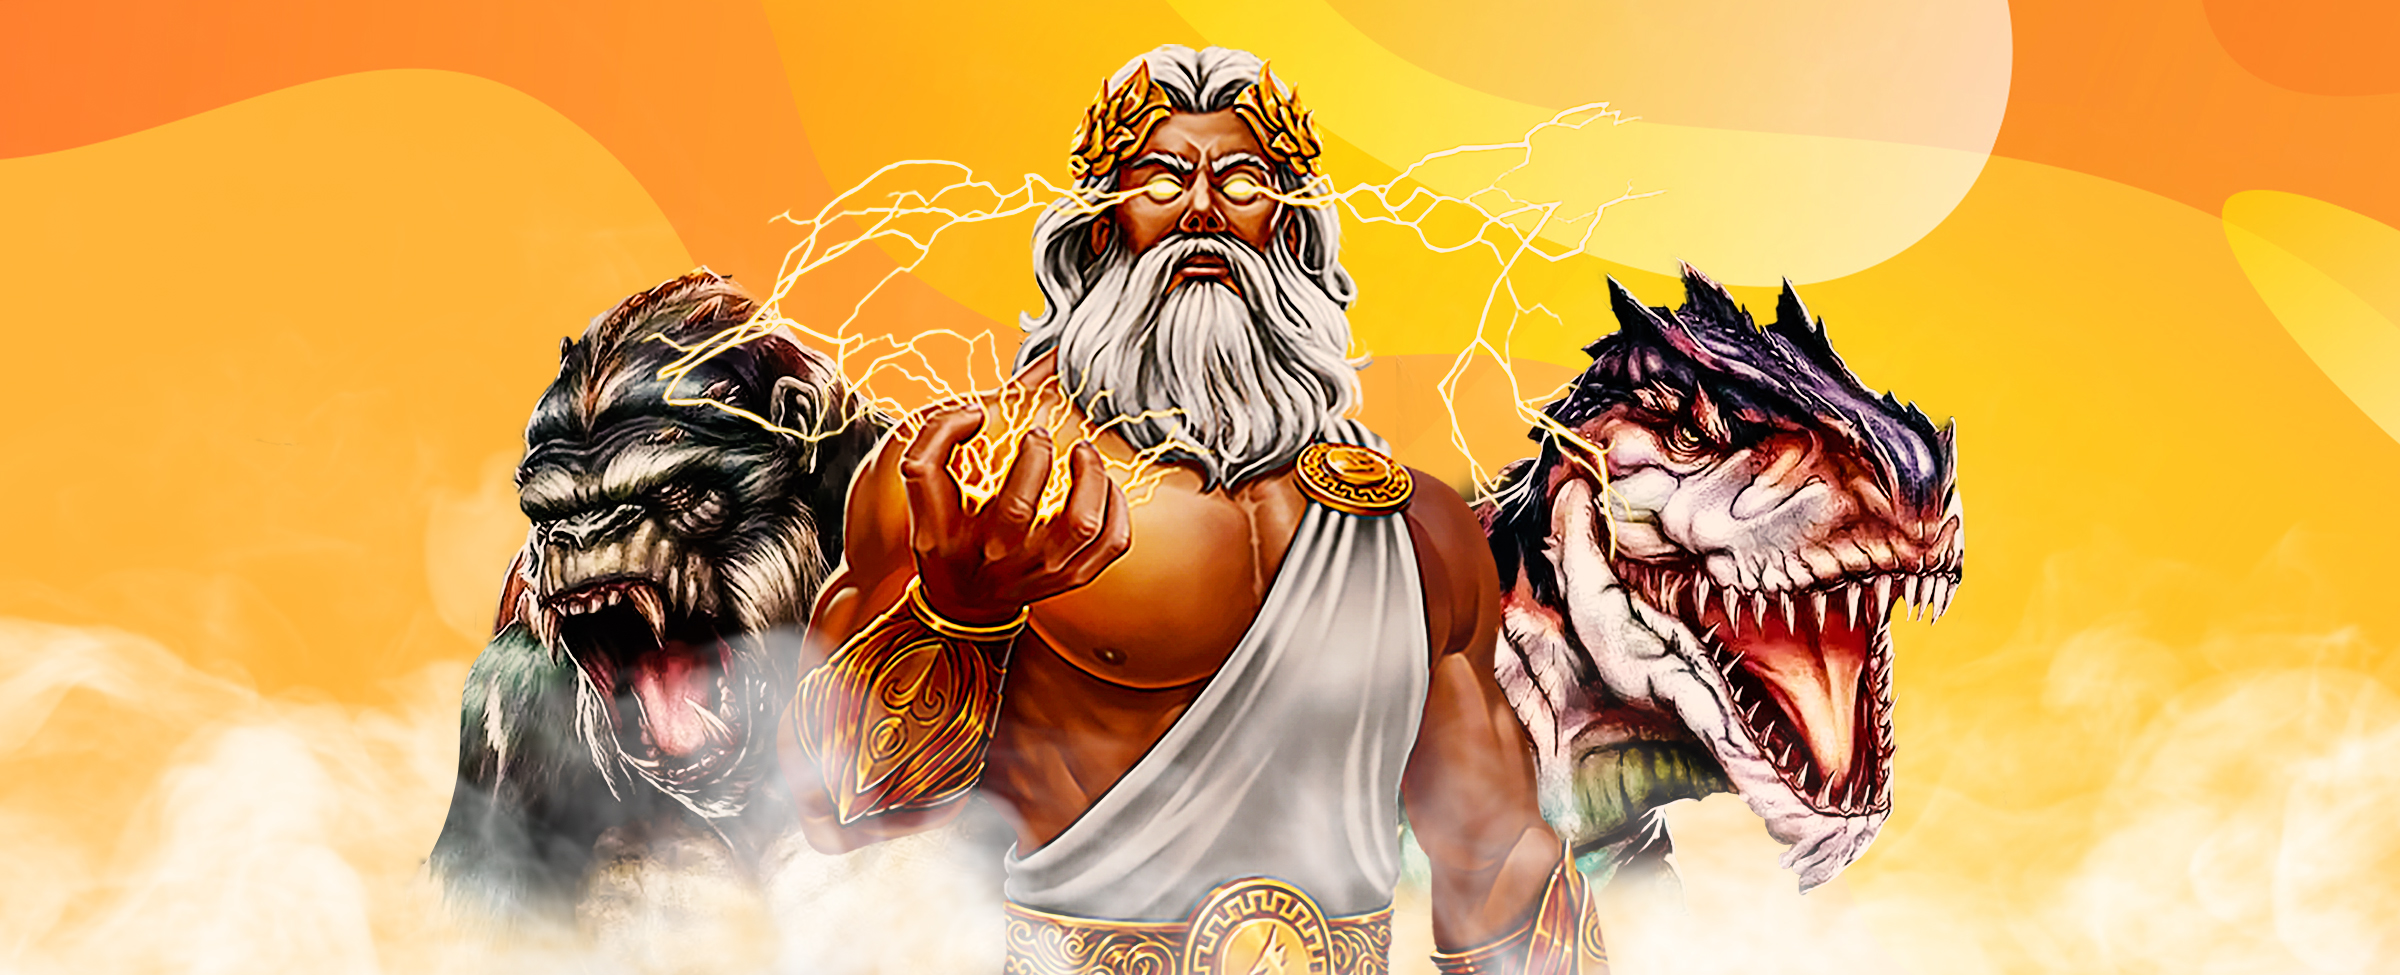 SlotsLV game characters including the Greek God Zeus, King Kong and Godzilla stand beside each other in a cloud of smoke against an orange and yellow background